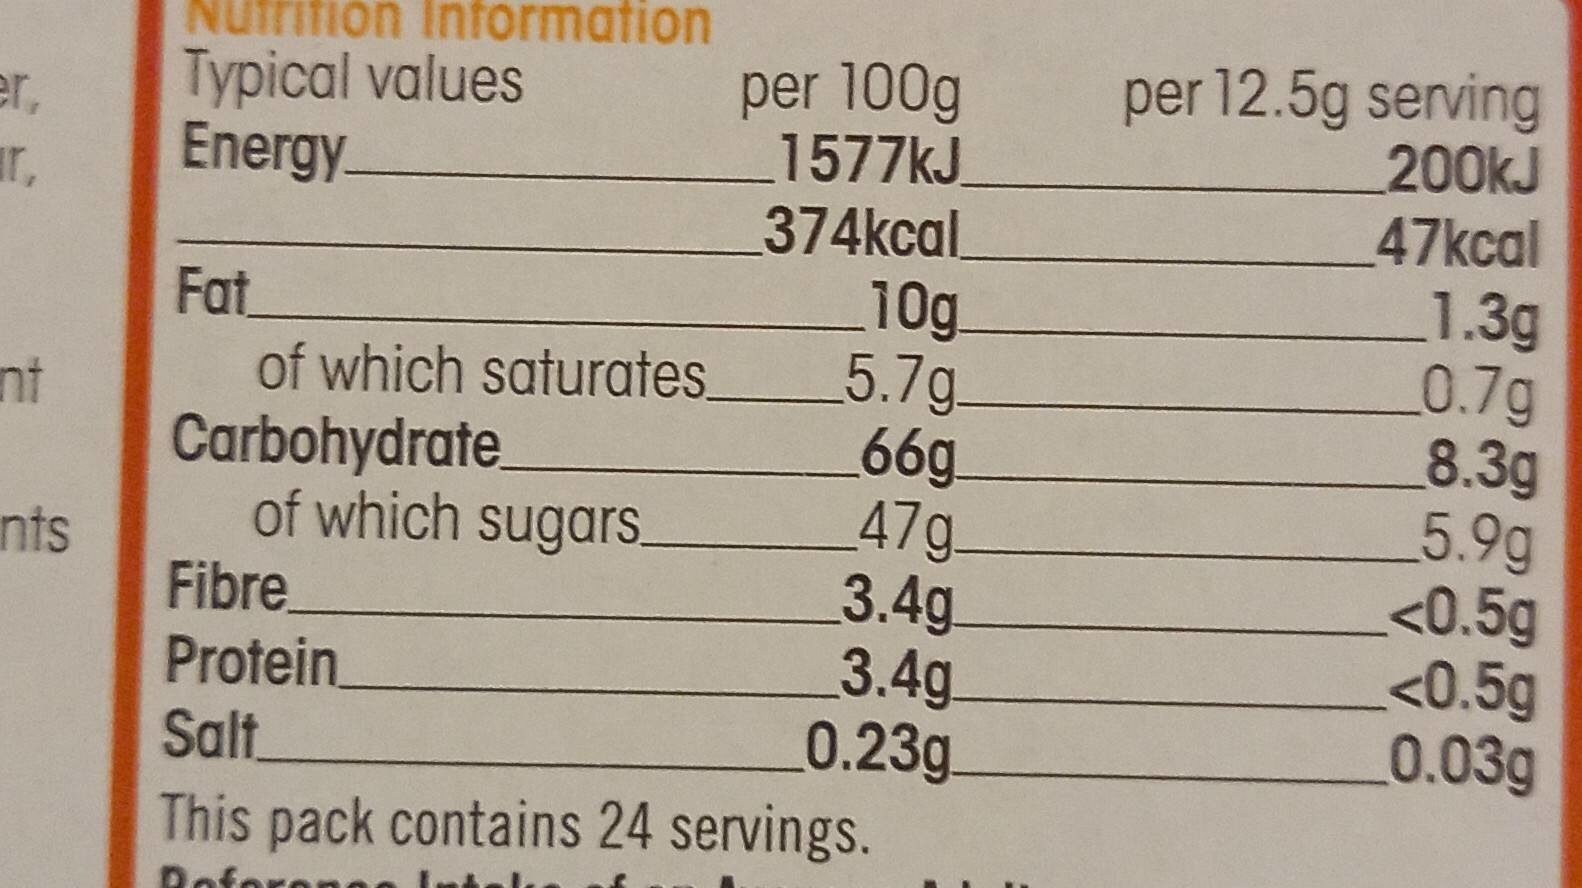 Jaffa cakes - Nutrition facts